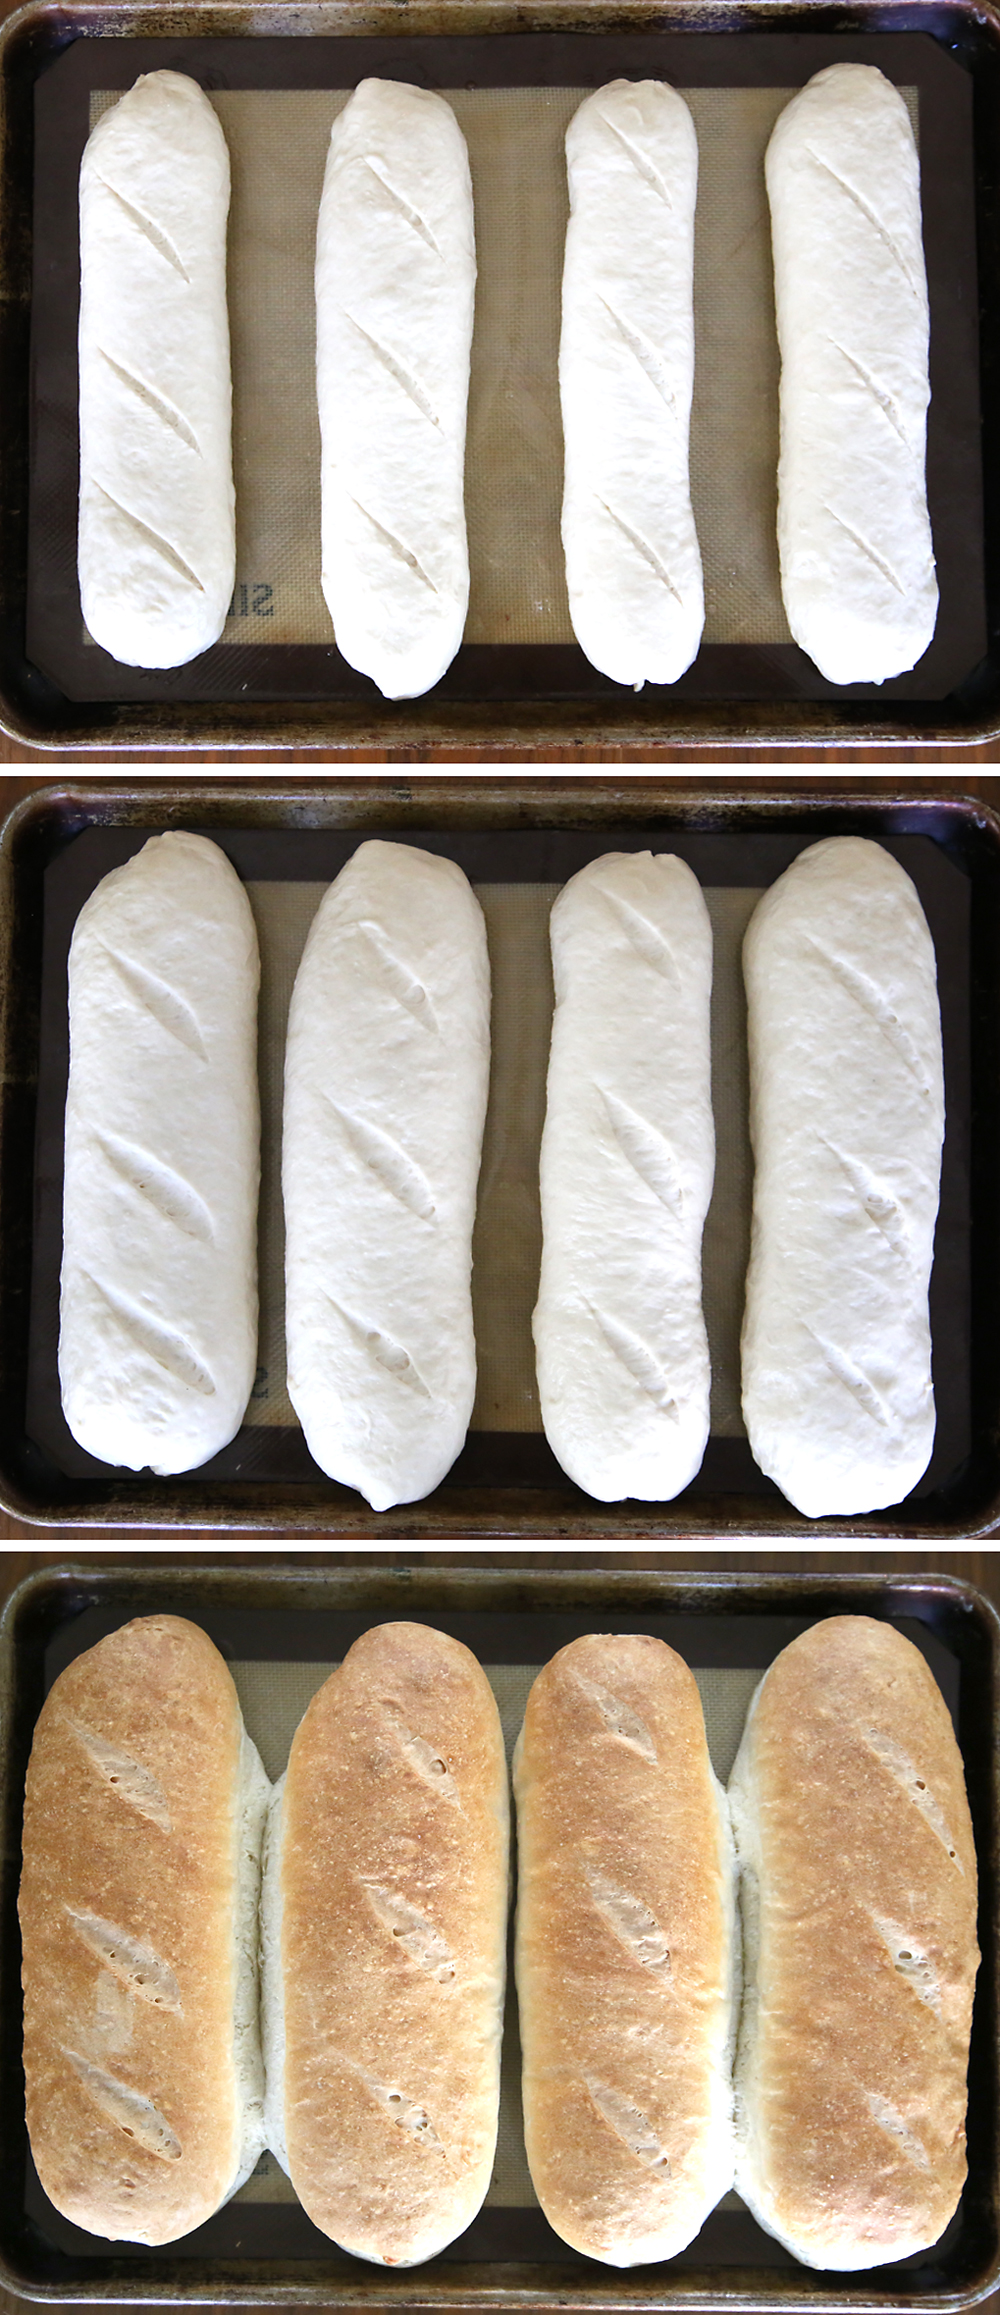 Four pieces of french bread dough shaped into long loaves with three slices on top, on a cookie sheet; collage shows the loaves before the rise, after the rise, and after being baked